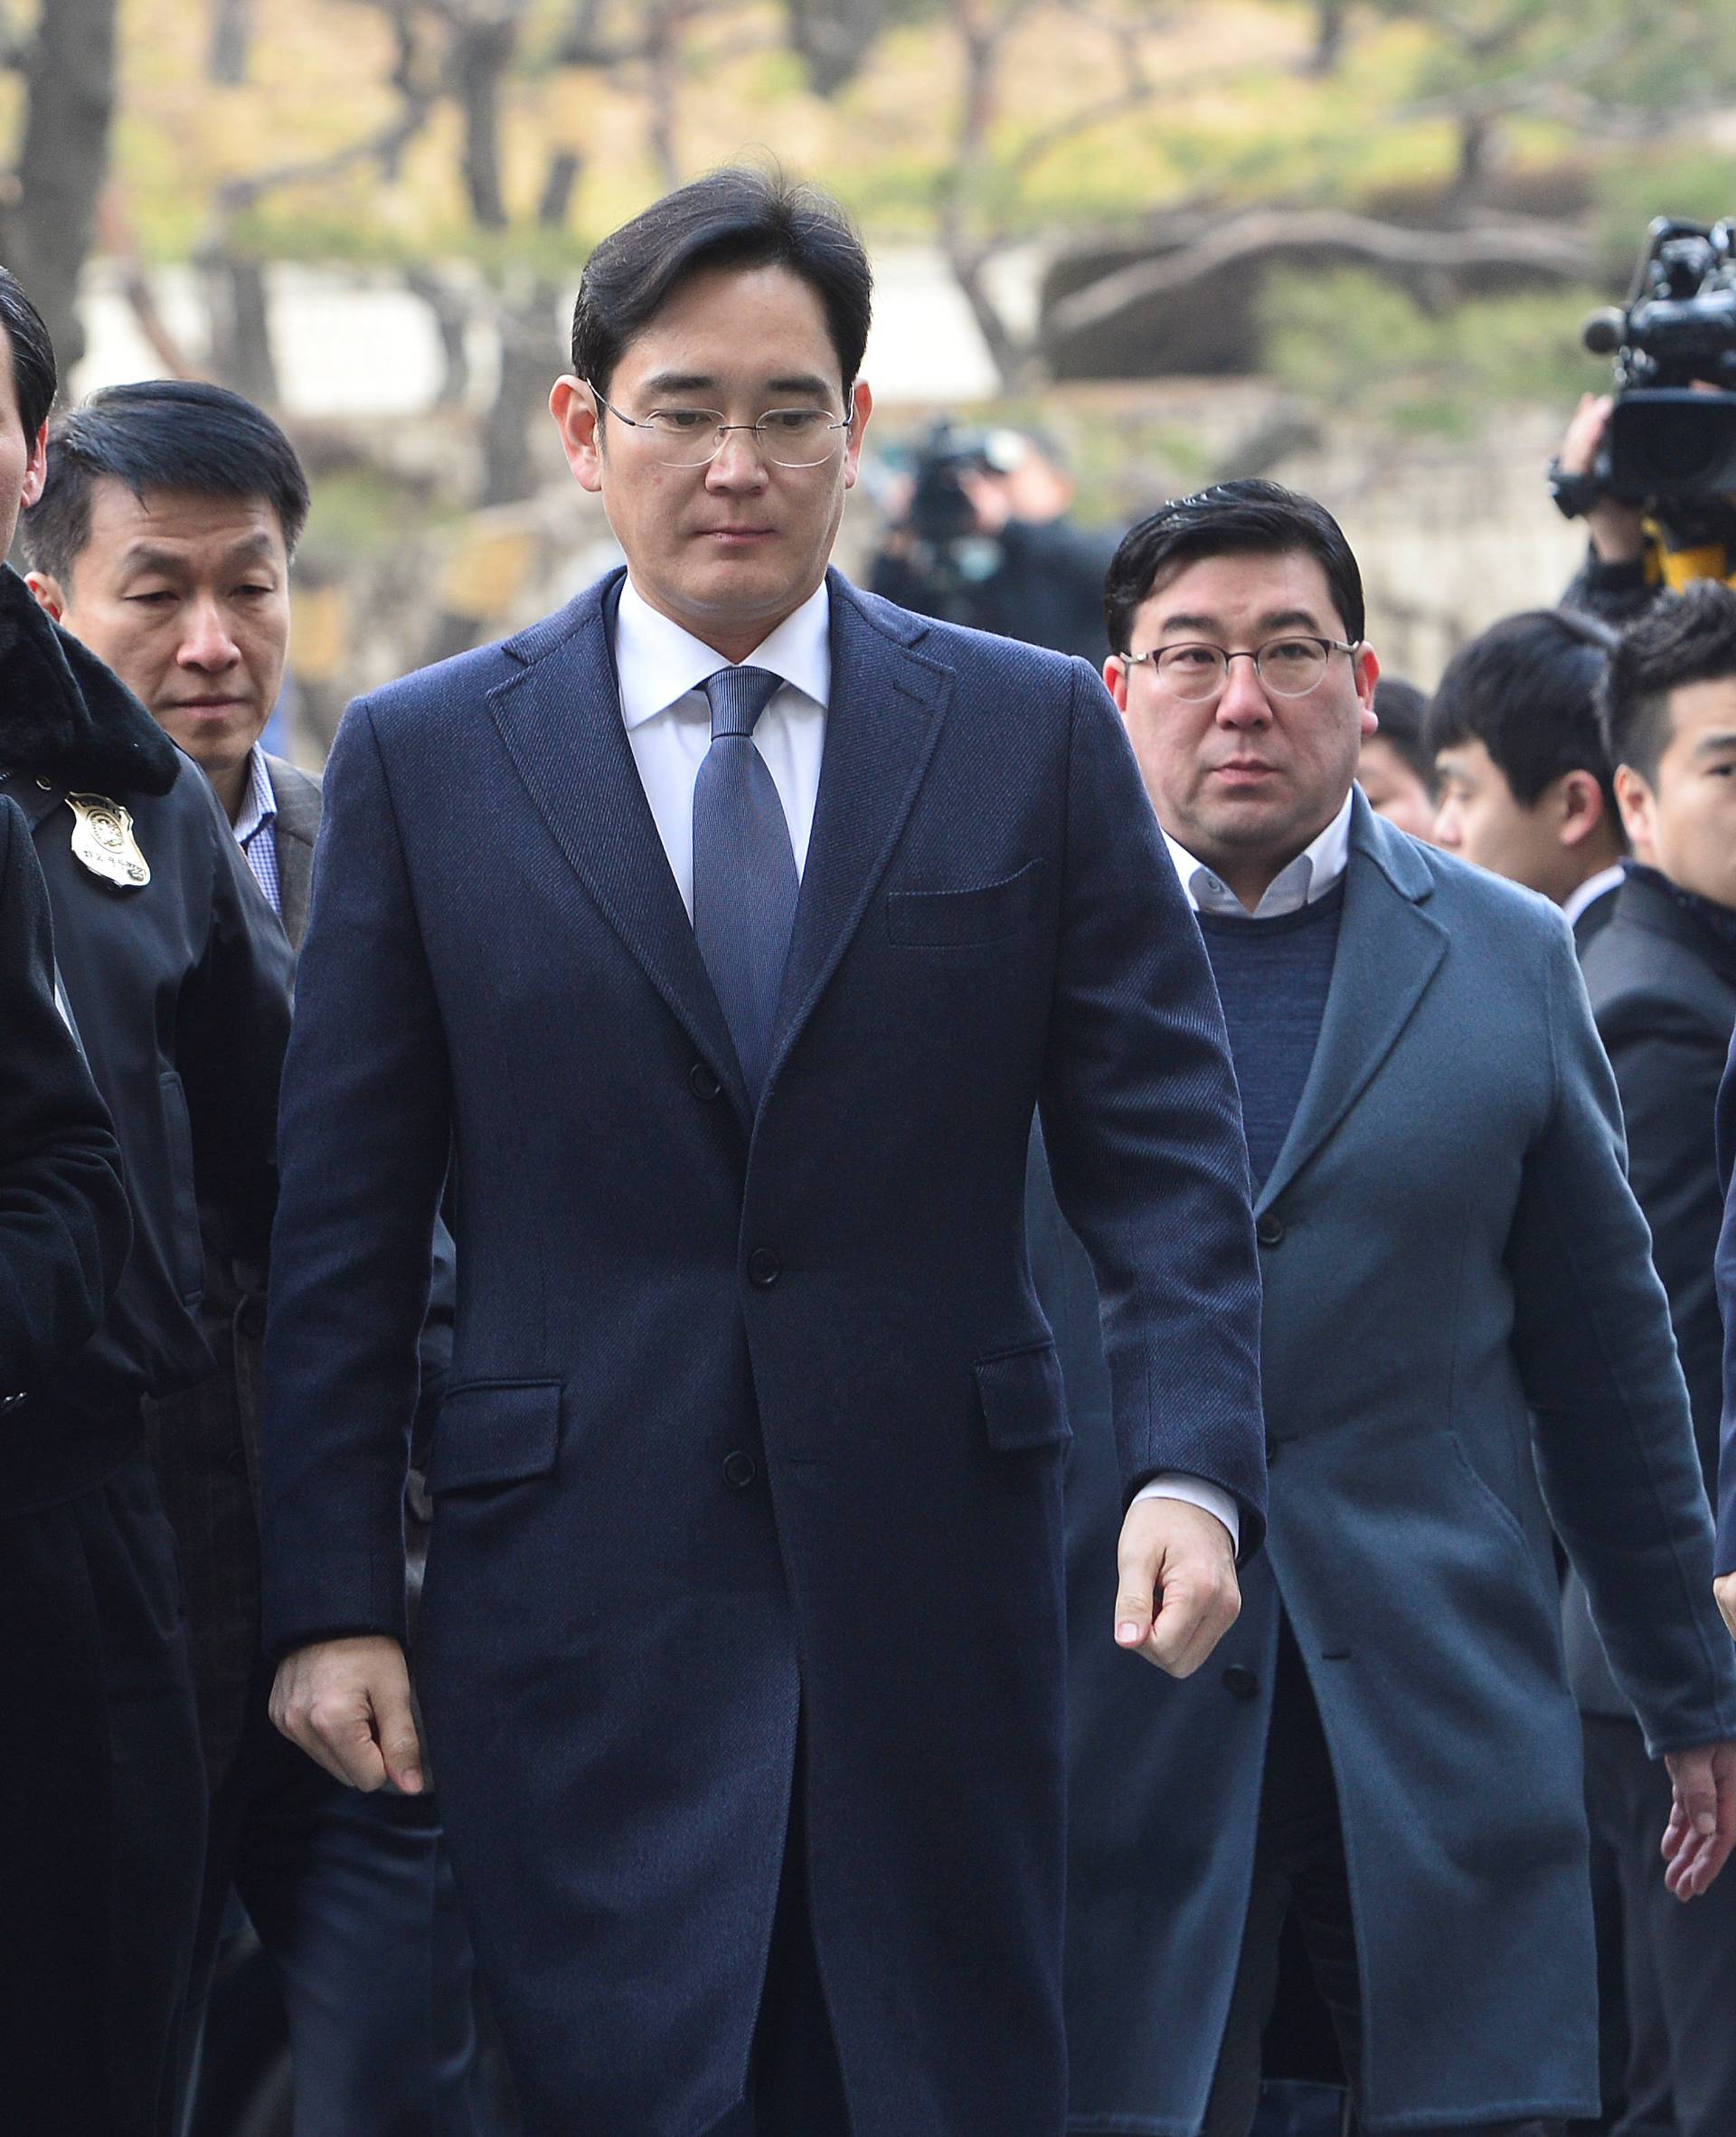 Samsung Group chief, Jay Y. Lee, arrives at the Seoul Central District Court in Seoul